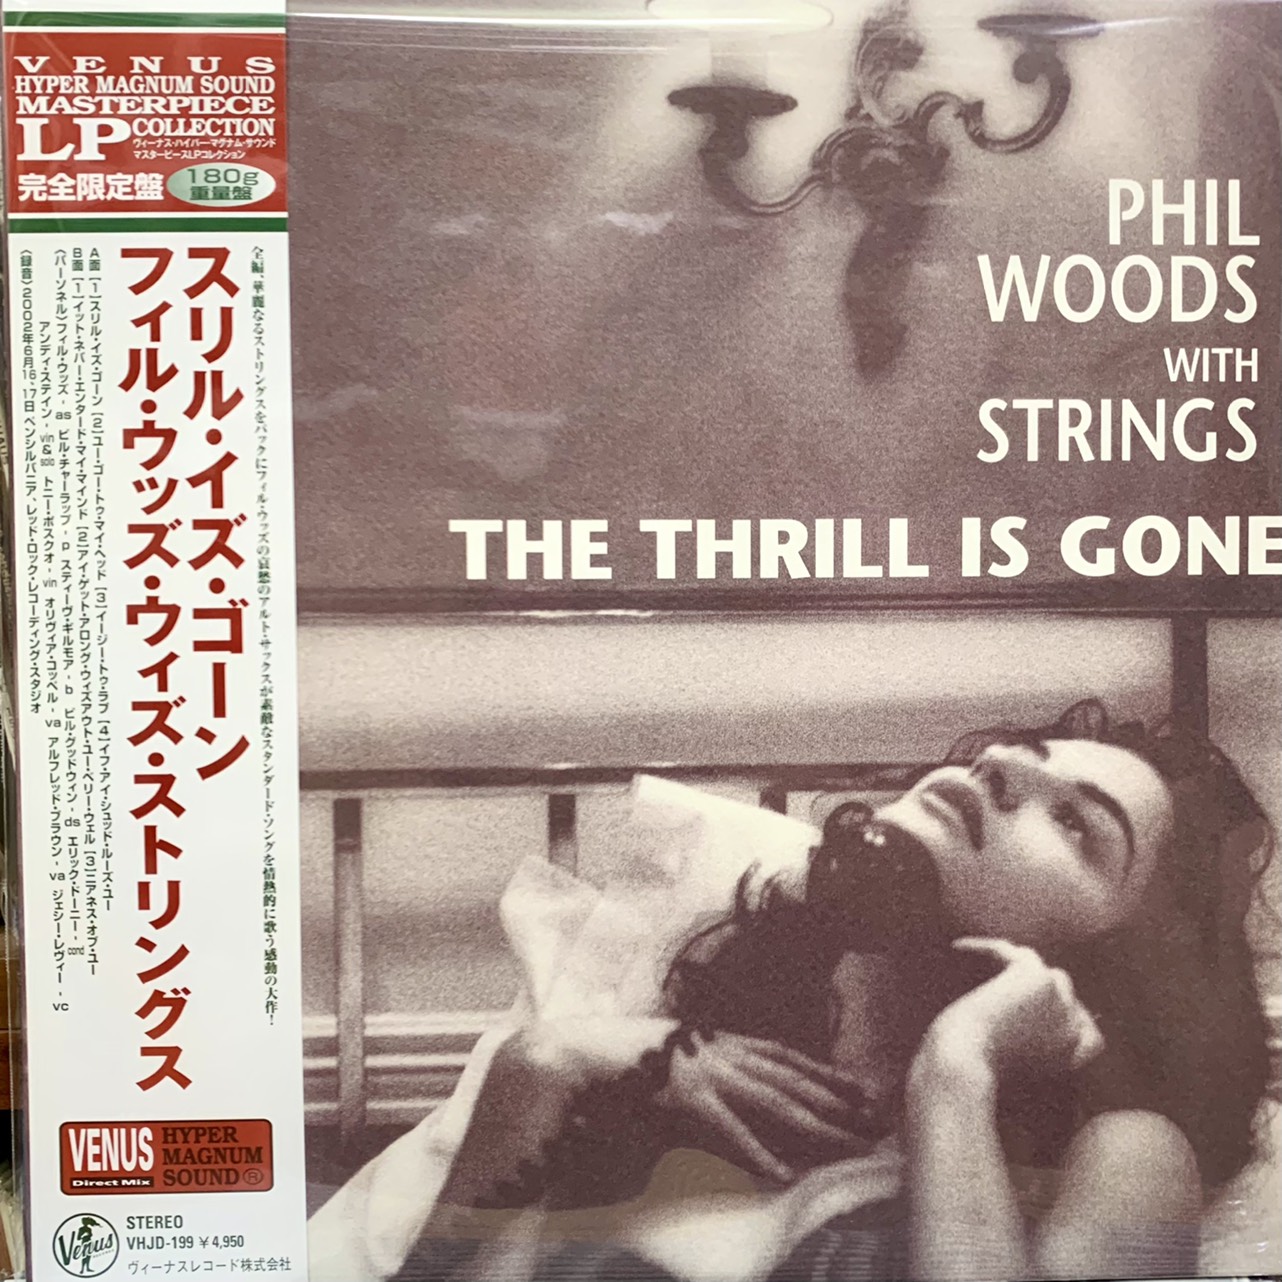 dia-than-vinyl-phil-woods-with-strings-the-thrill-is-gone